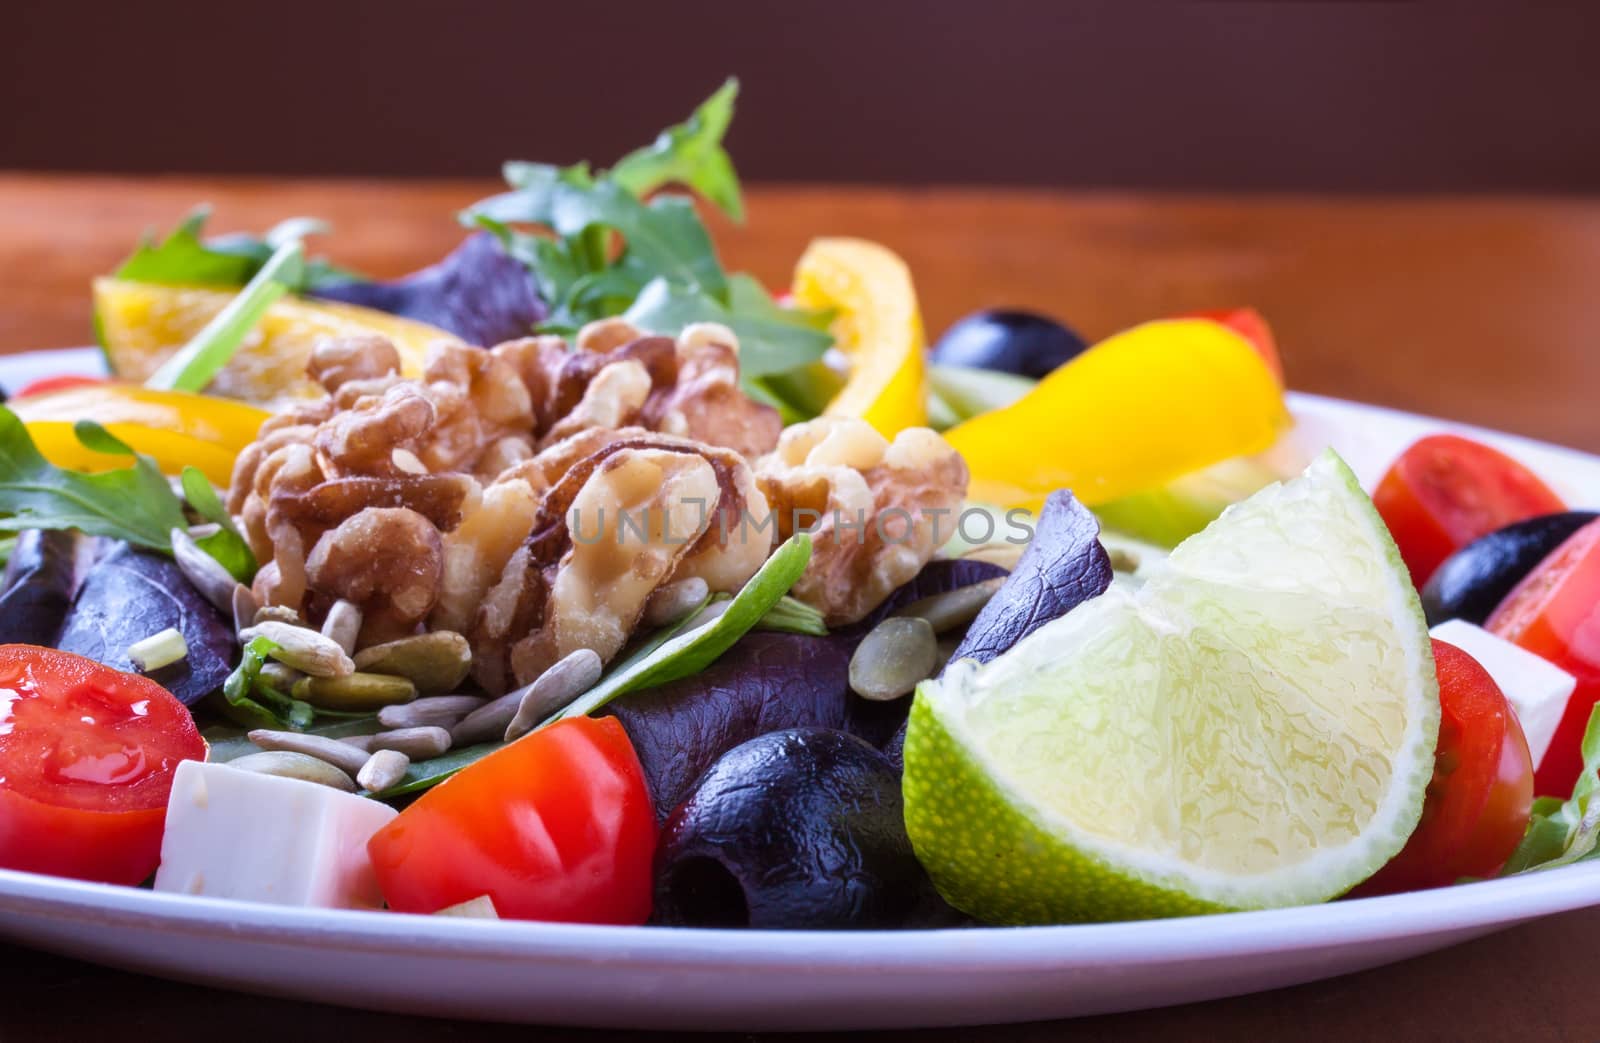 Closeup on a fresh healthy green salad with olive, cheese and walnuts in a white plate